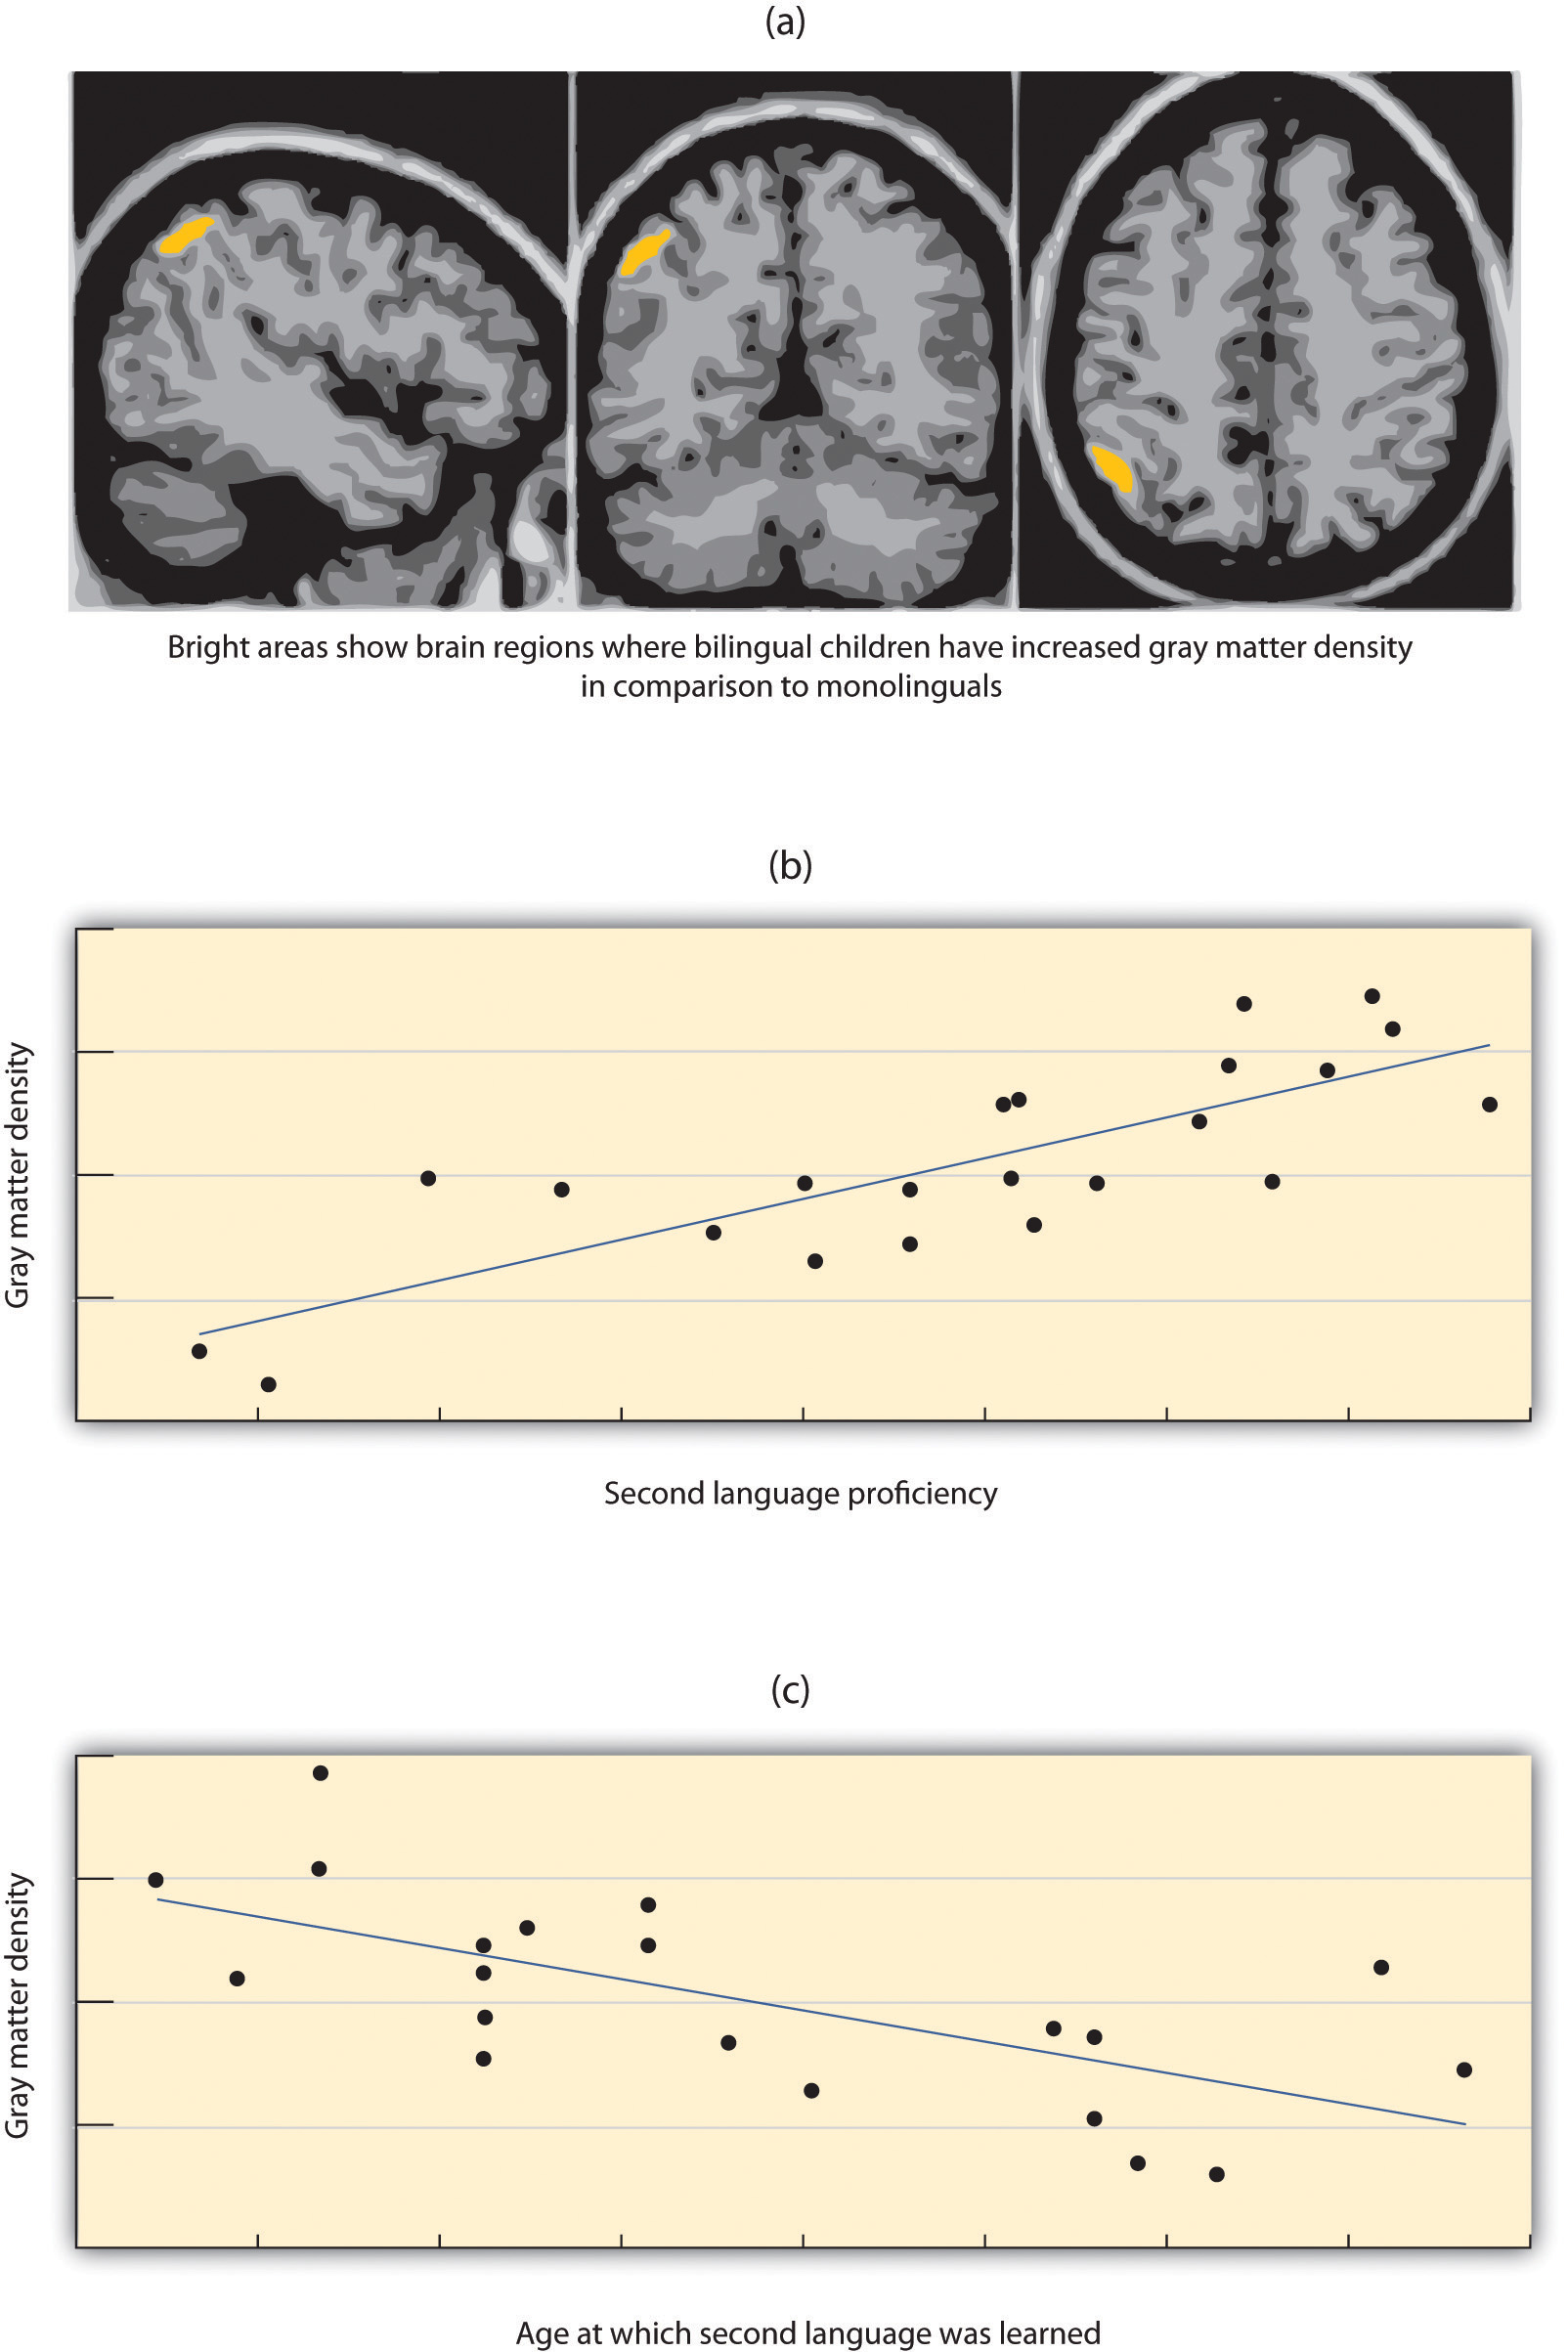 Andrea Mechelli and her colleagues (2004) found that children who were bilingual had increased gray matter density (i.e., more neurons) in cortical areas related to language in comparison to monolinguals (panel a), that gray matter density correlated positively with second language proficiency (panel b) and that gray matter density correlated negatively with the age at which the second language was learned (panel c).